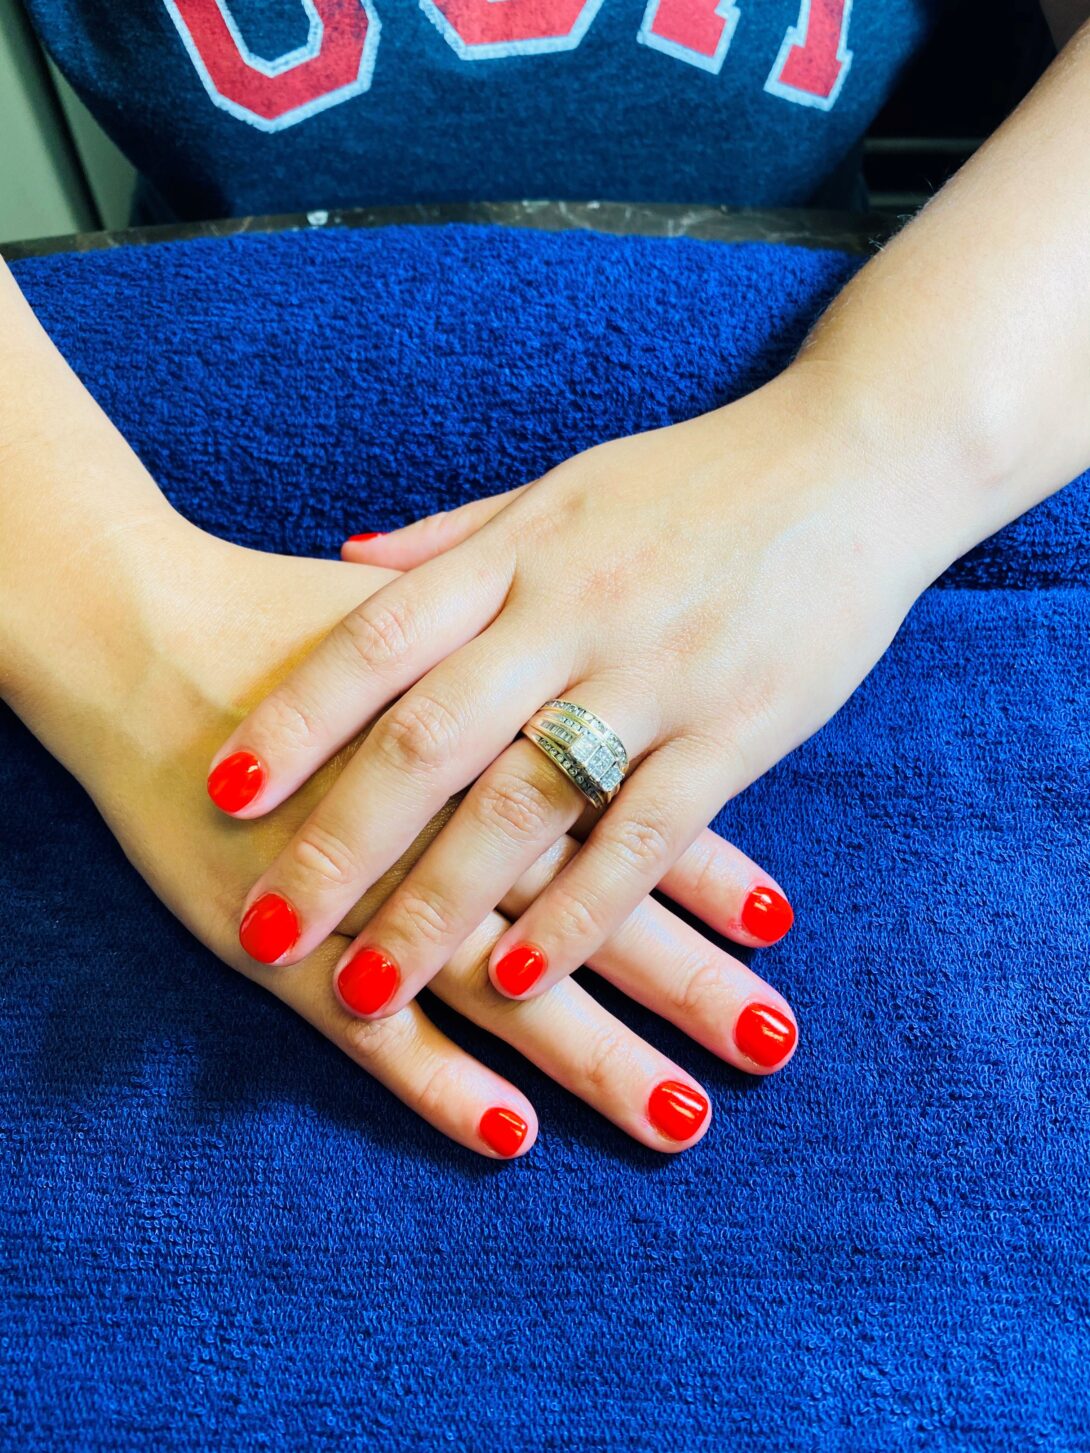 A woman with red nails is holding her hand